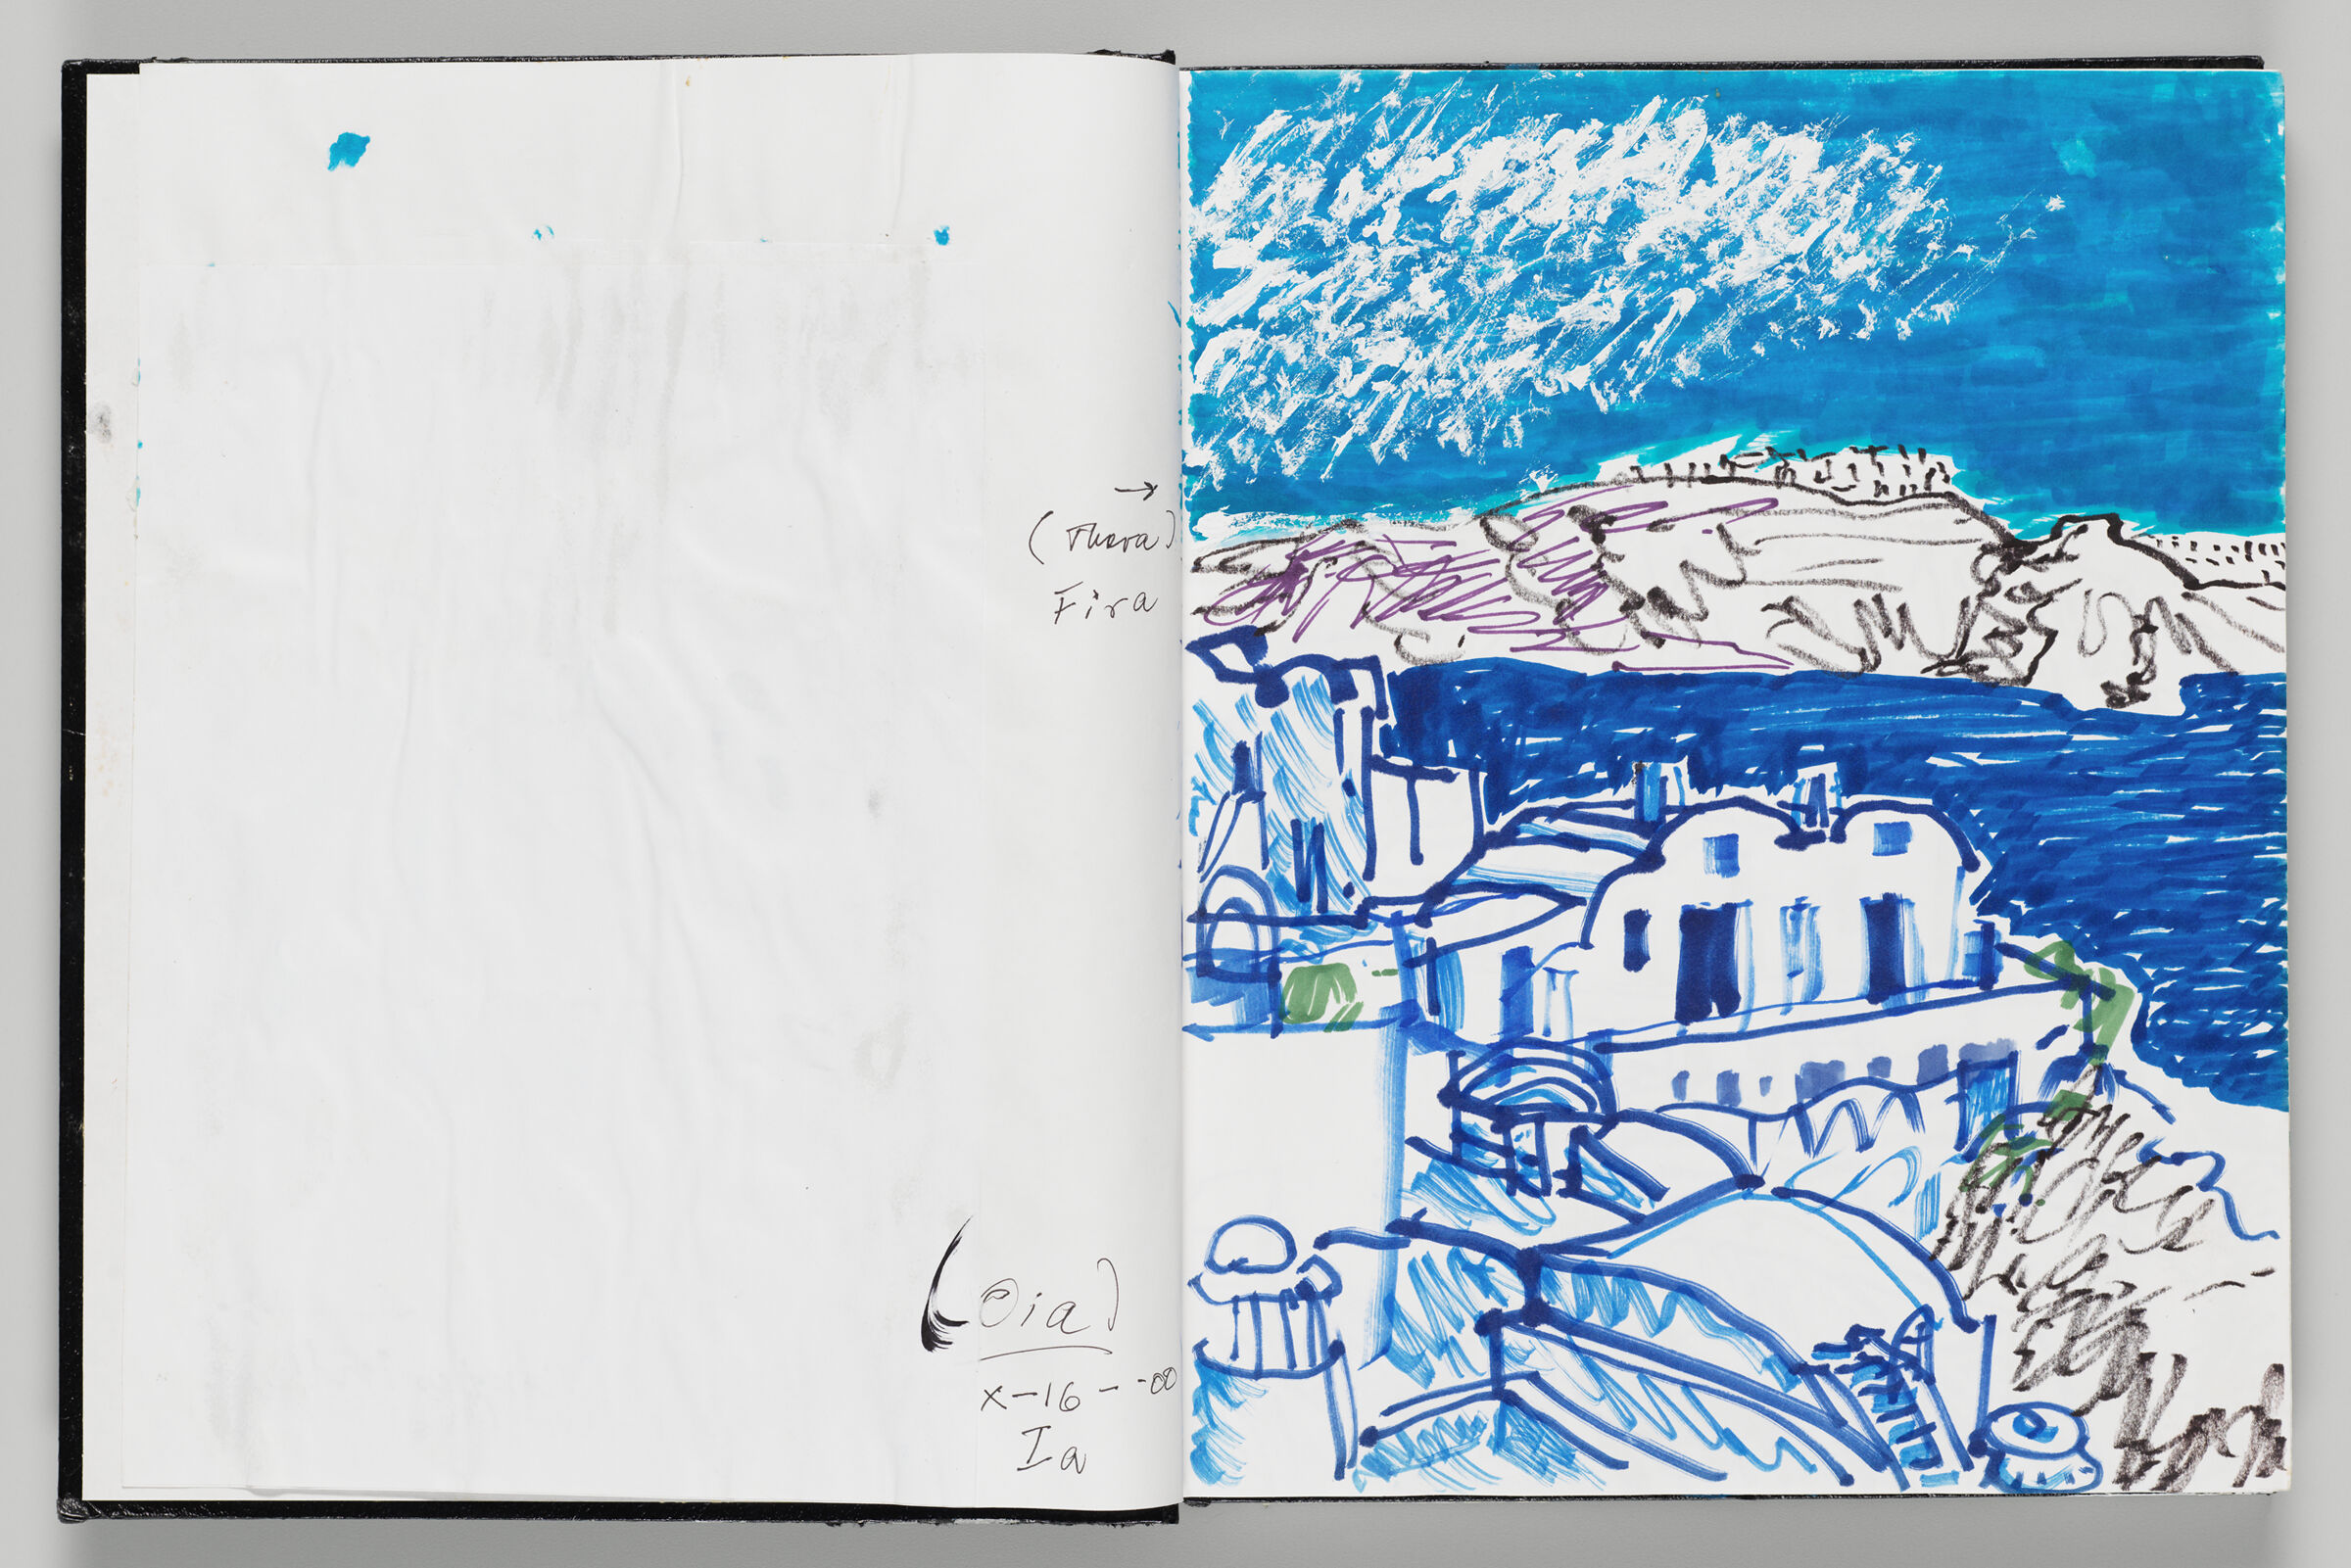 Untitled (Blank Adhered Sheet And Notes, Left Page); Untitled (View Of Santorini, Right Page)